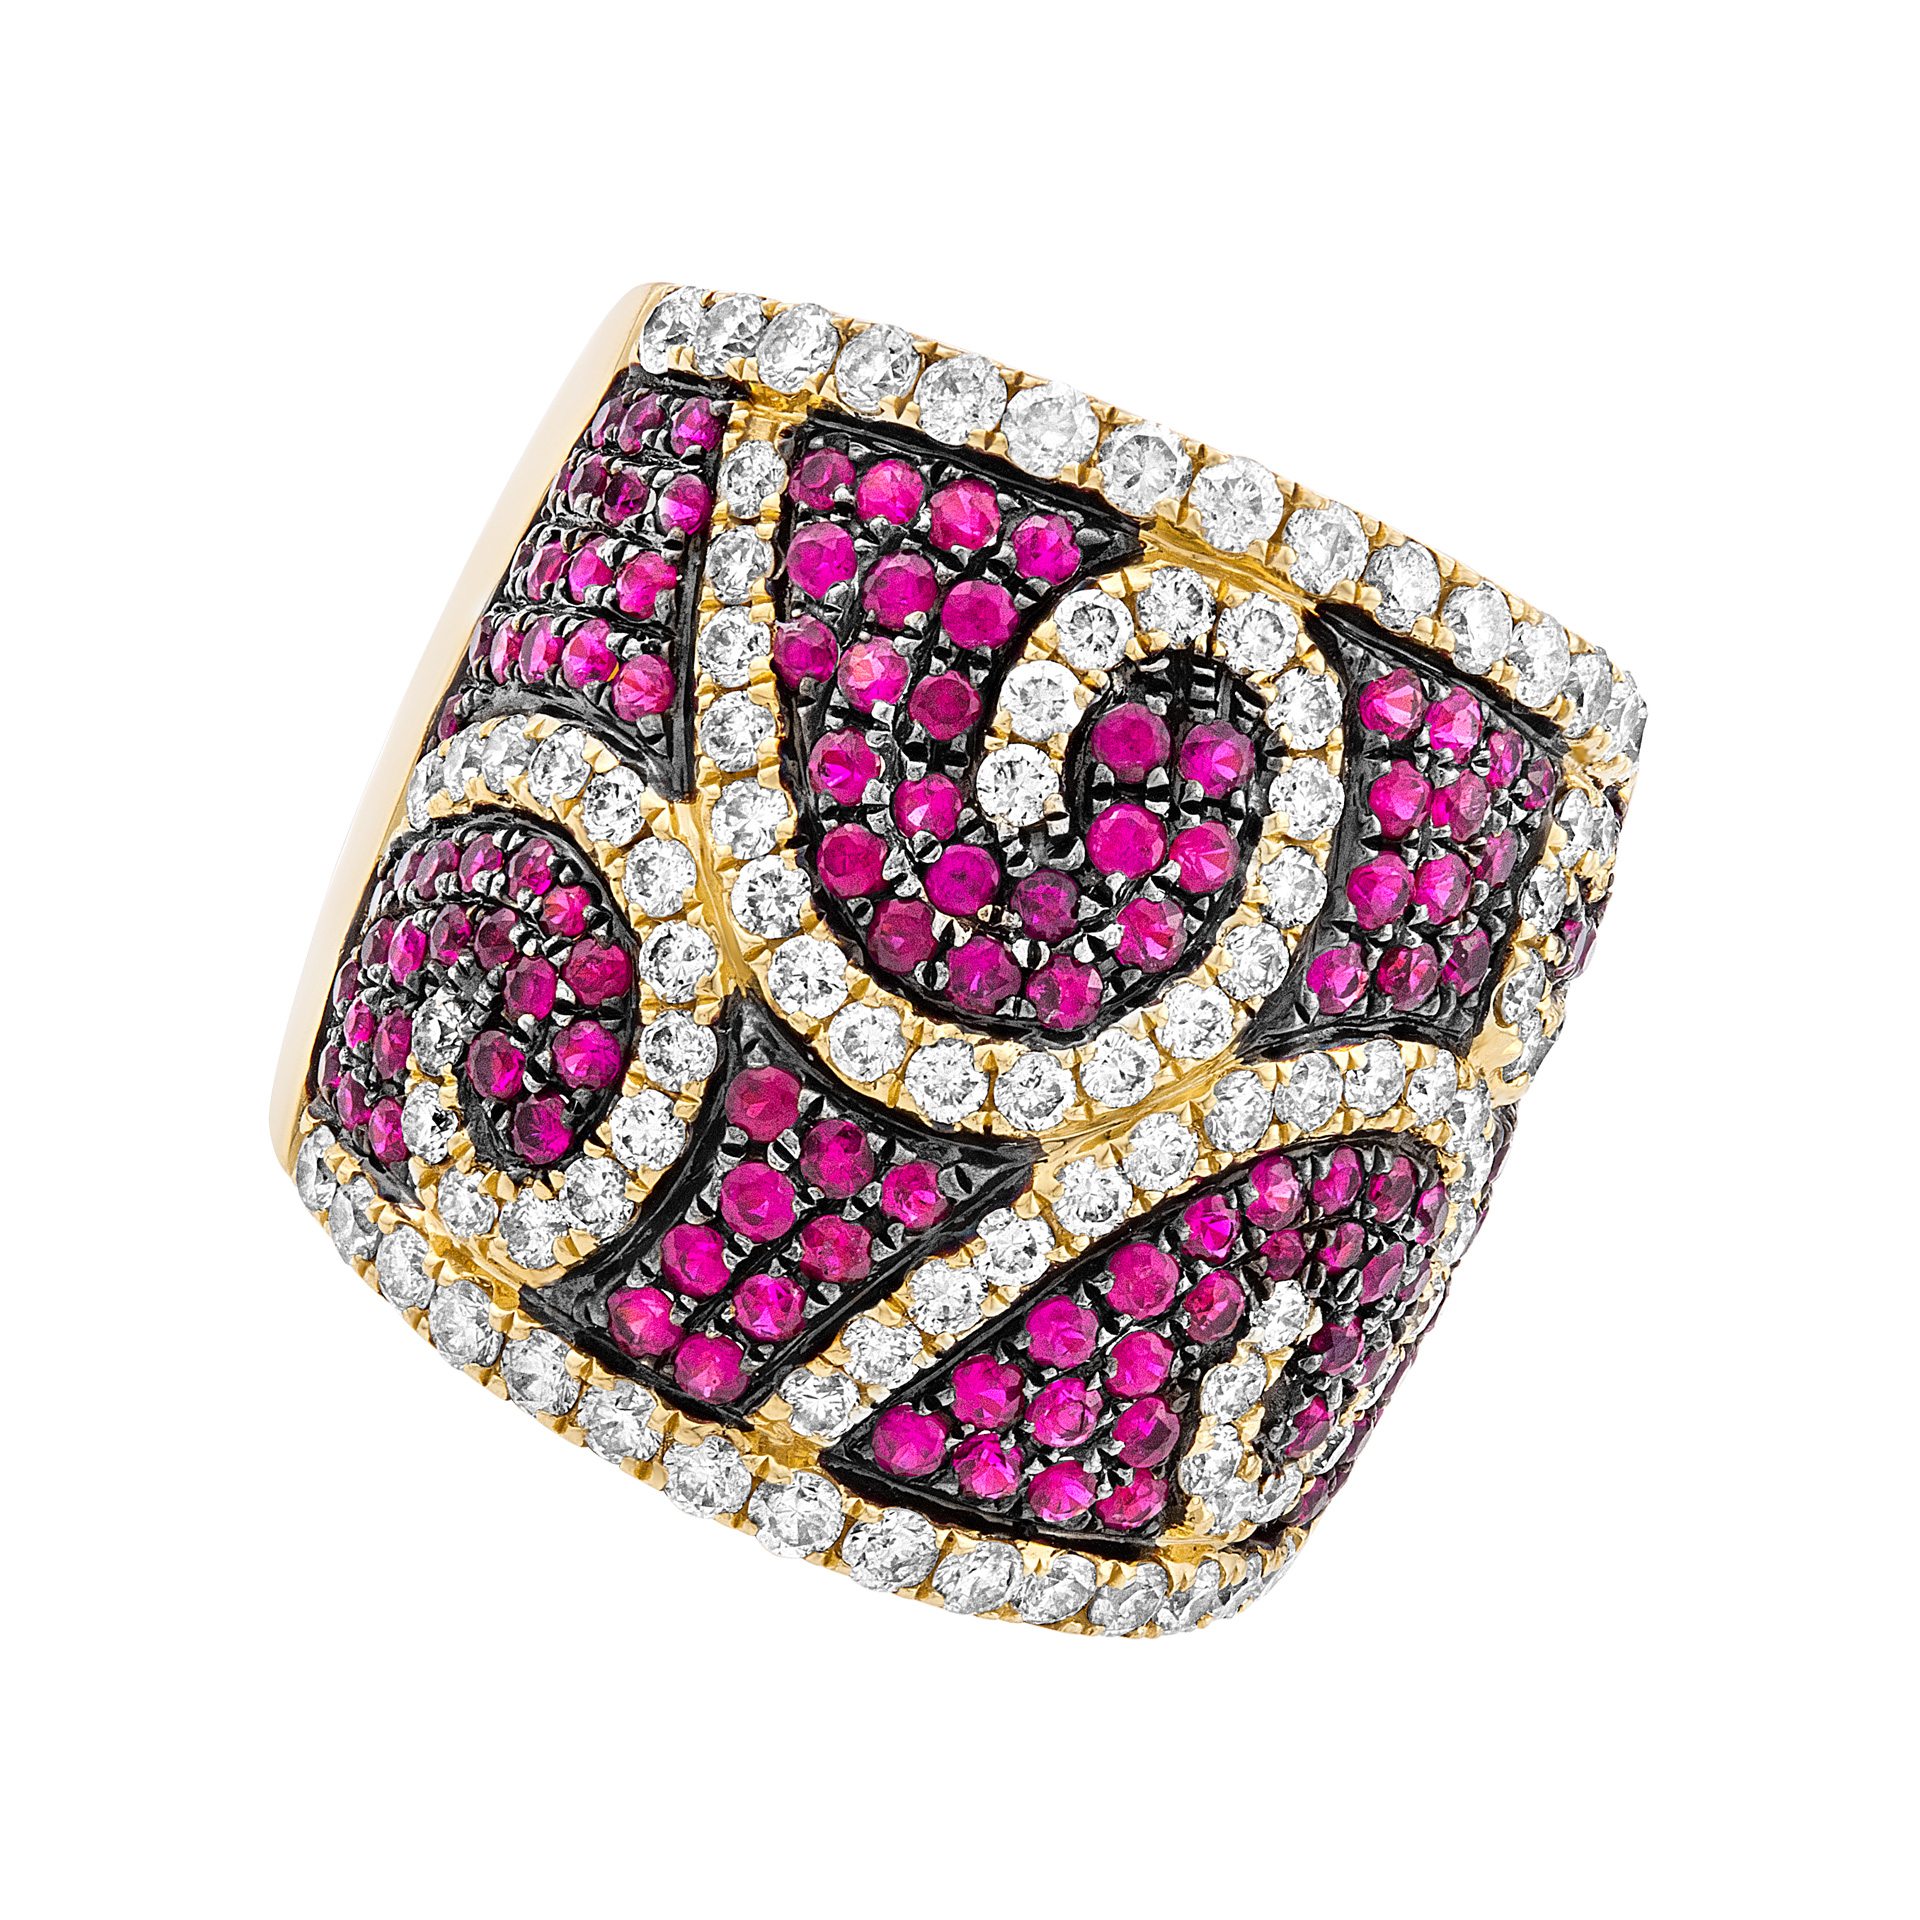 Diamond and ruby ring in 18k yellow gold. 1.35 cts of rubies in PVD, 1.37cts in diamonds image 1